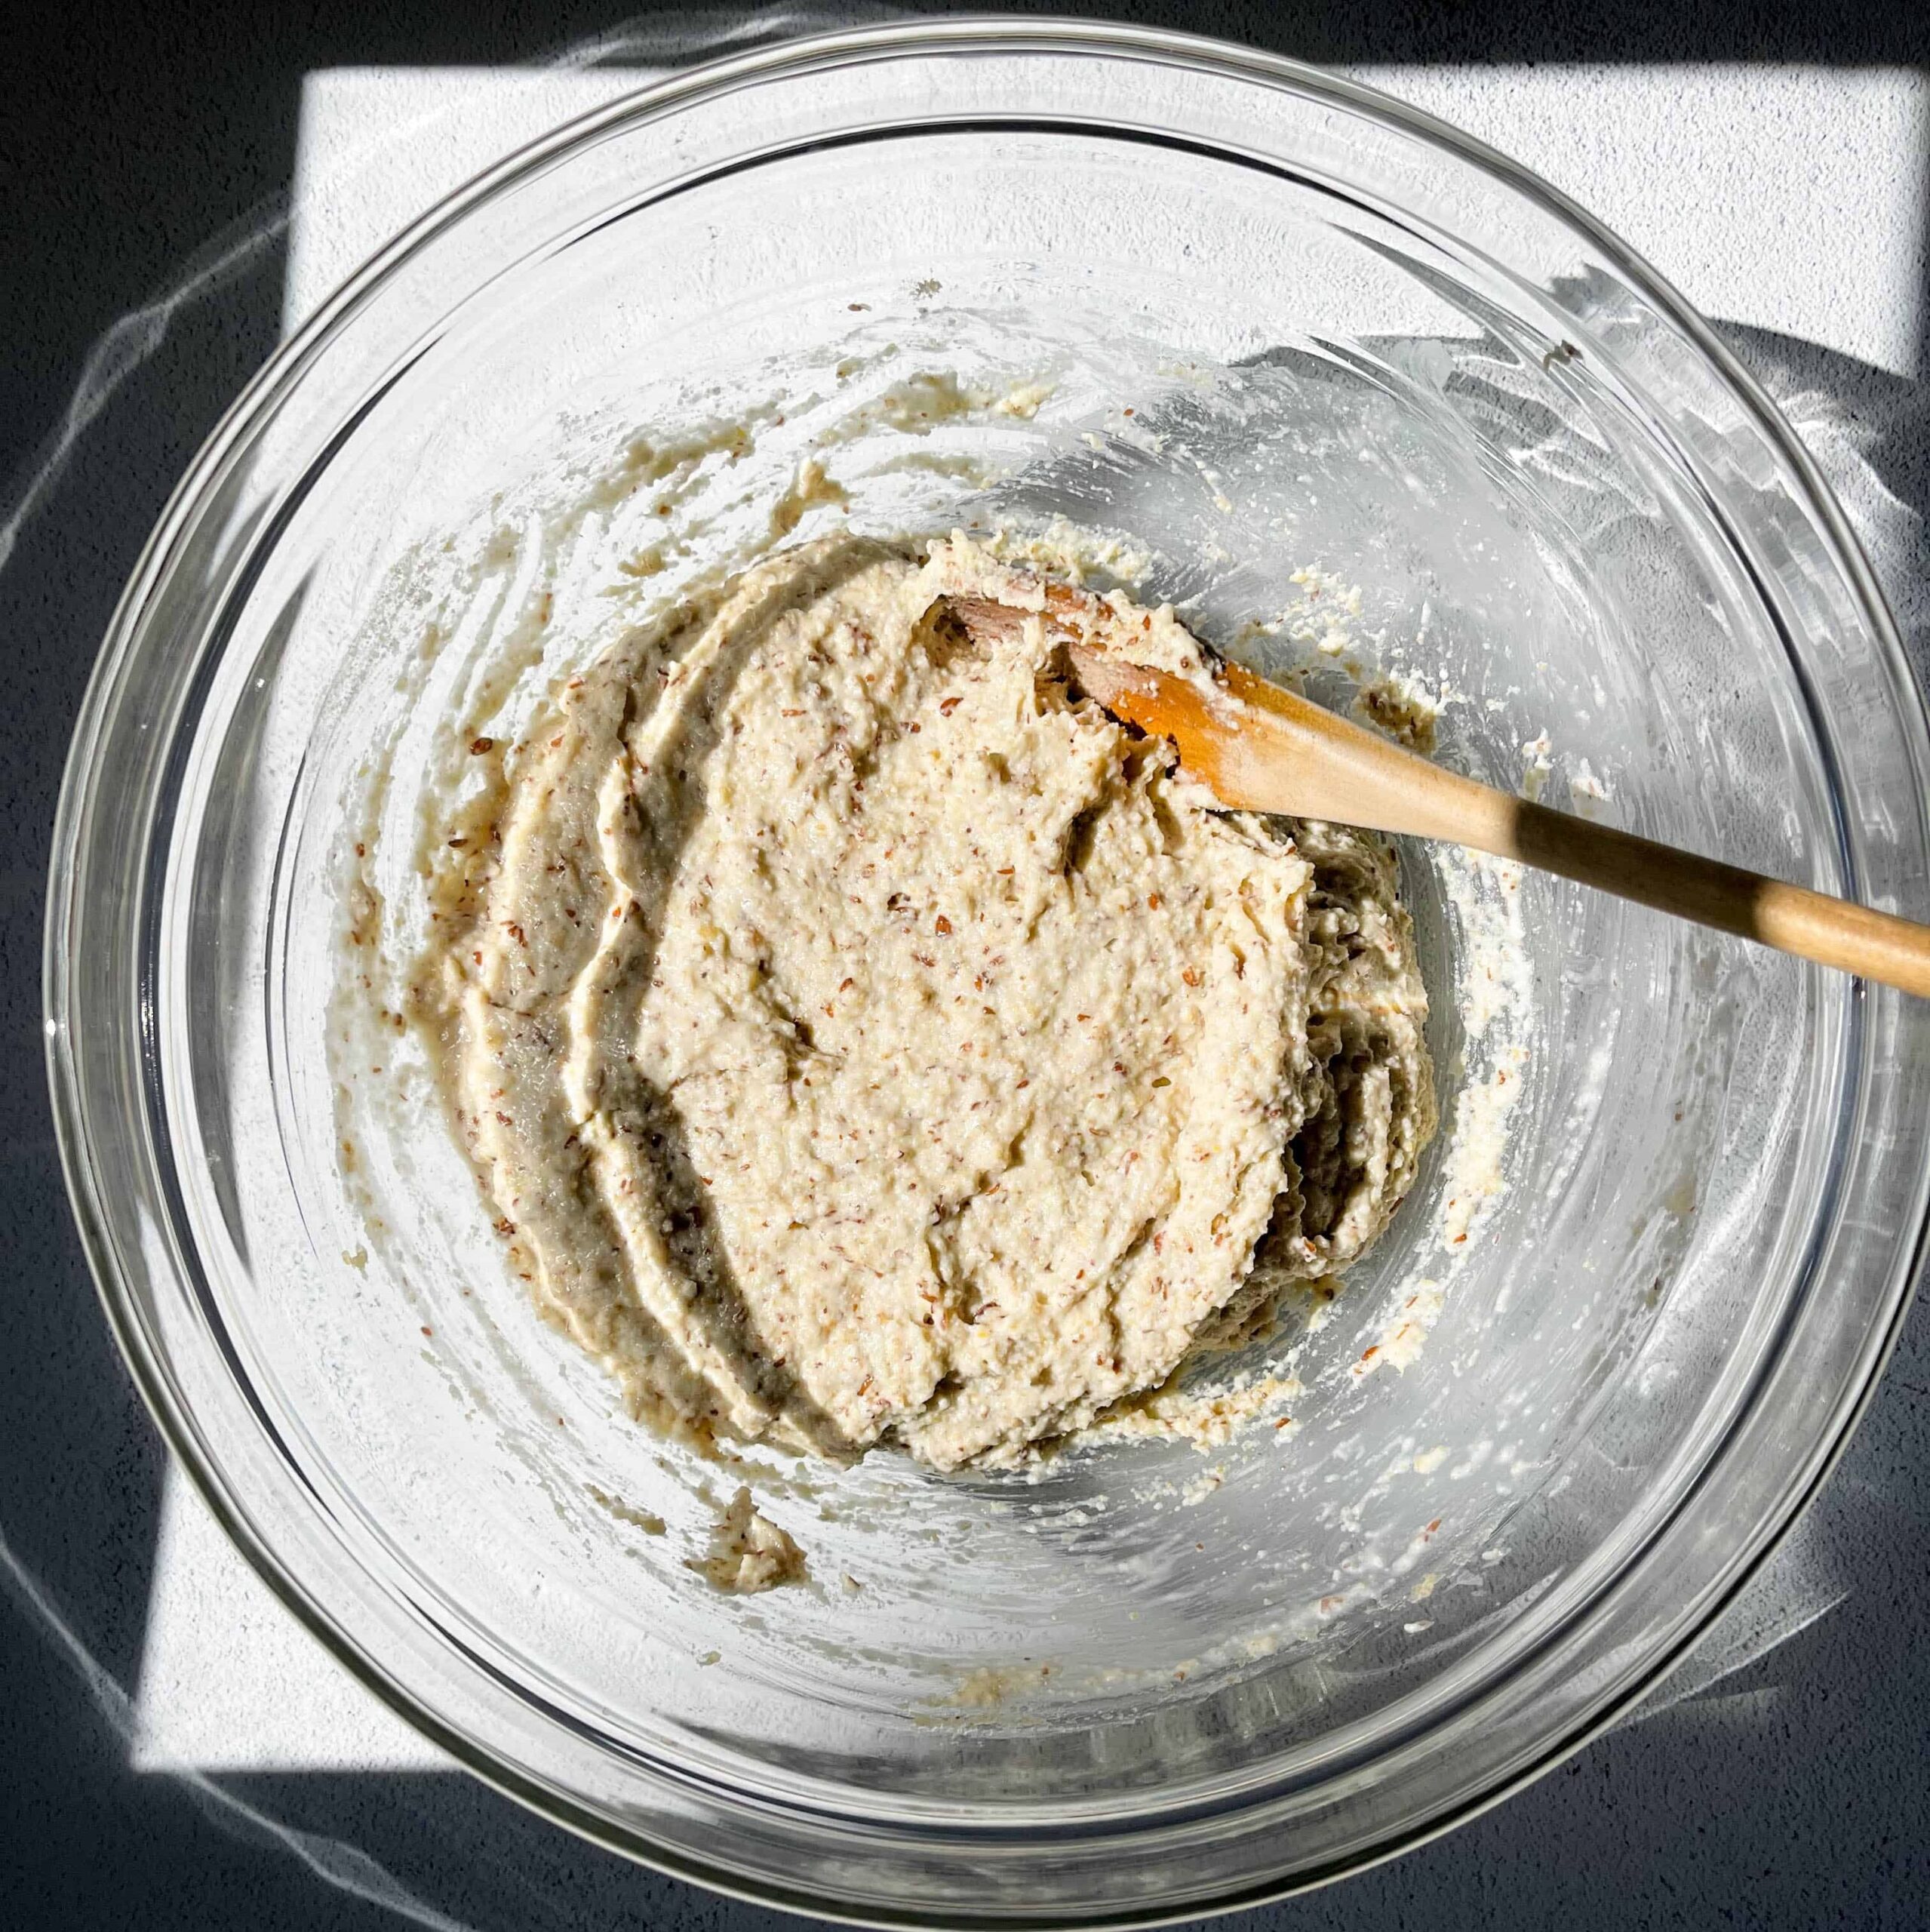 bowl of baking mix for quick and simple healthy vegan grain-free rolls